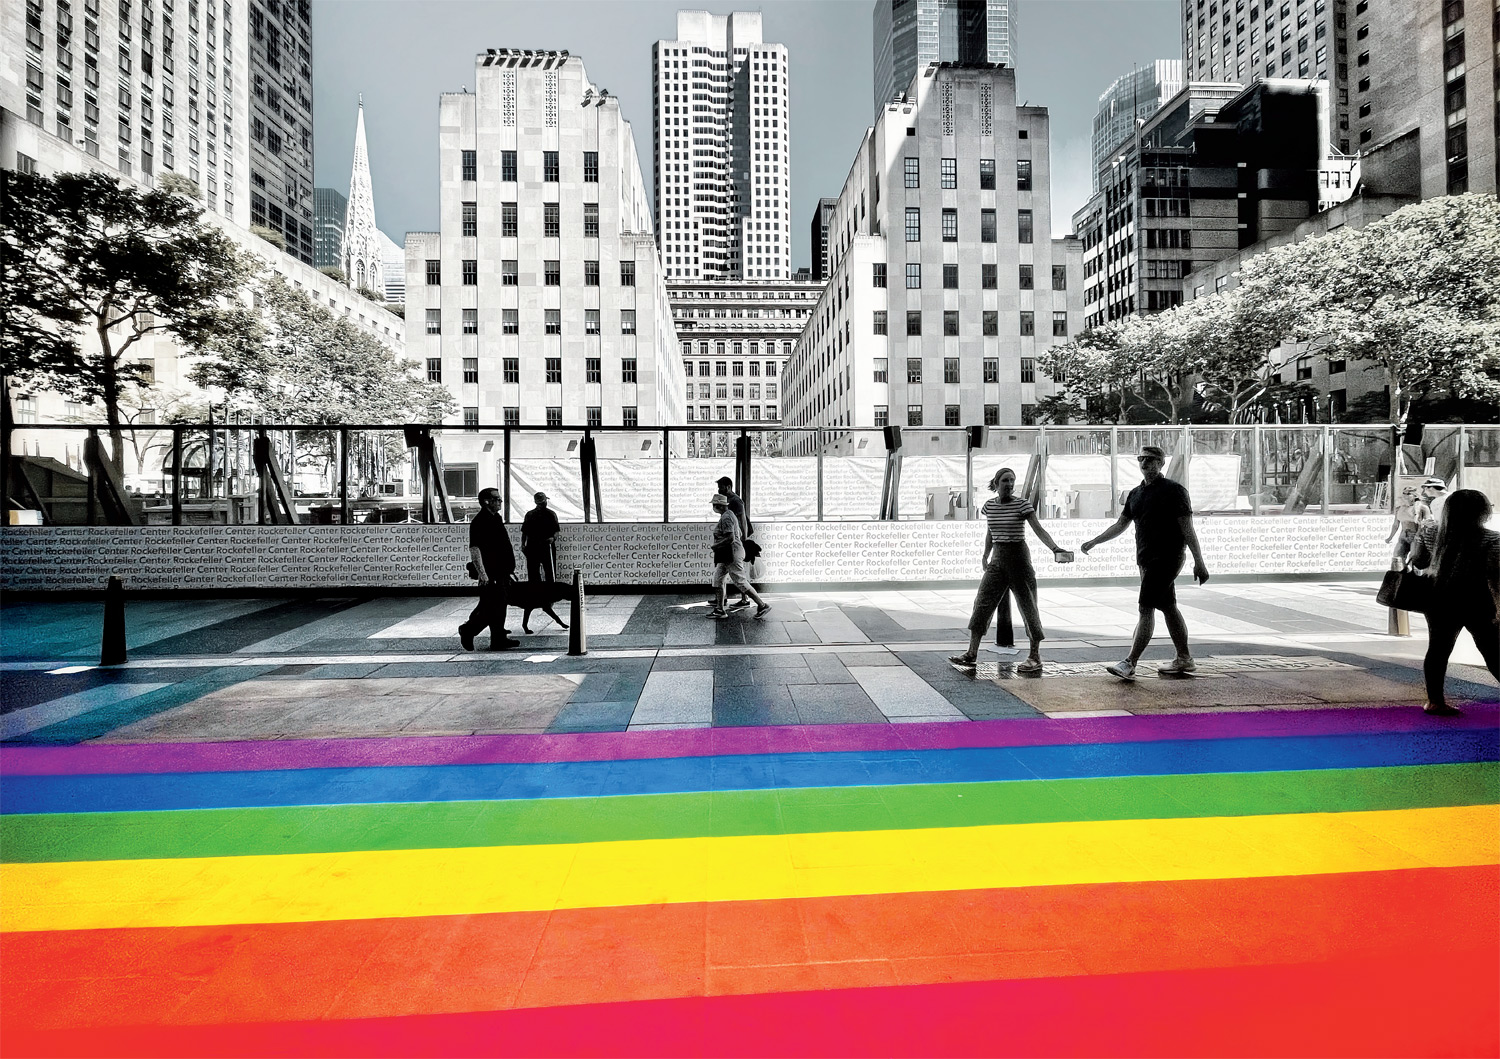 NYC Rainbow - Scratch and Dent New York Jigsaw Puzzle